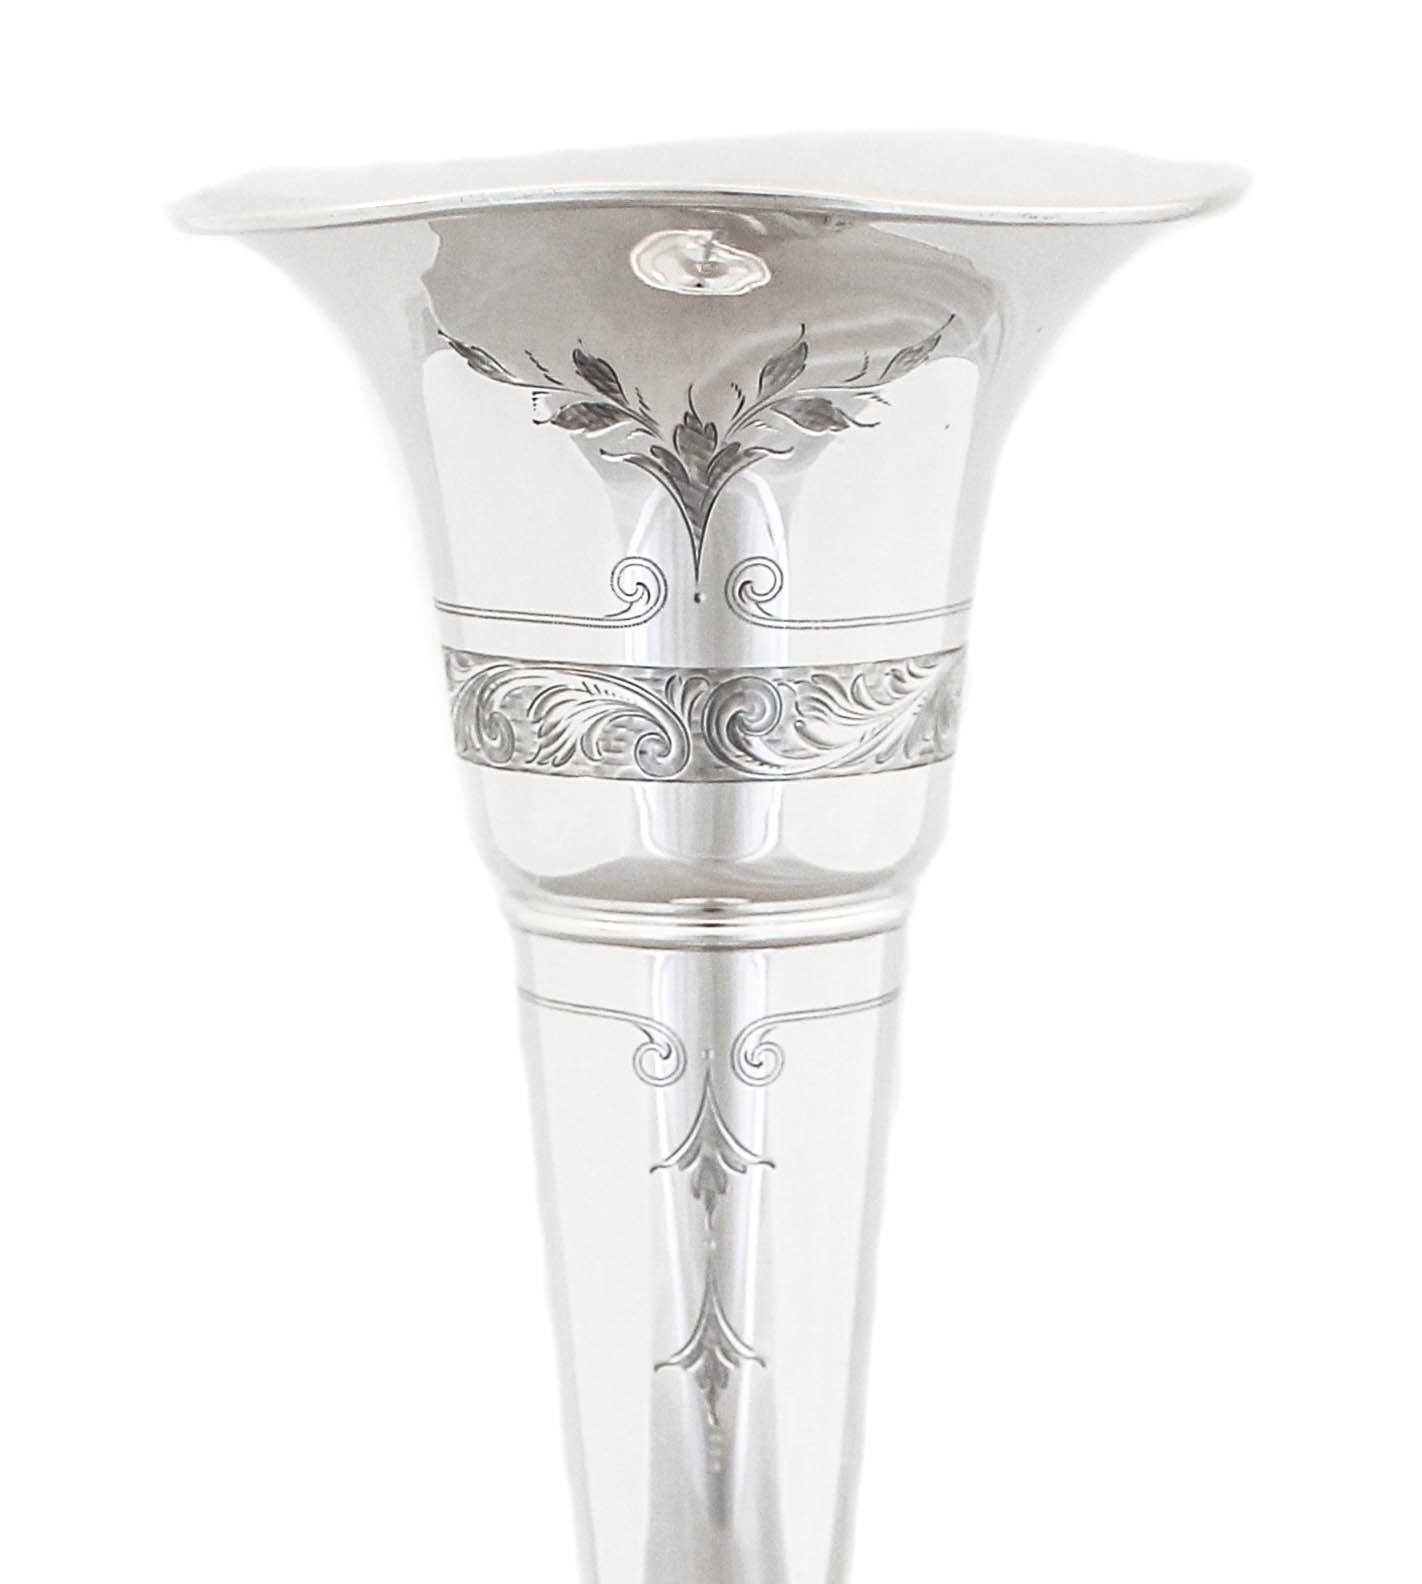 We are happy to offer you this sterling silver trumpet vase by Dominick and Haff. It has a fluted rim and a beautiful etched design around the top. It’s transitional and can work with either modern or traditional decor. Flowers make a room warm and